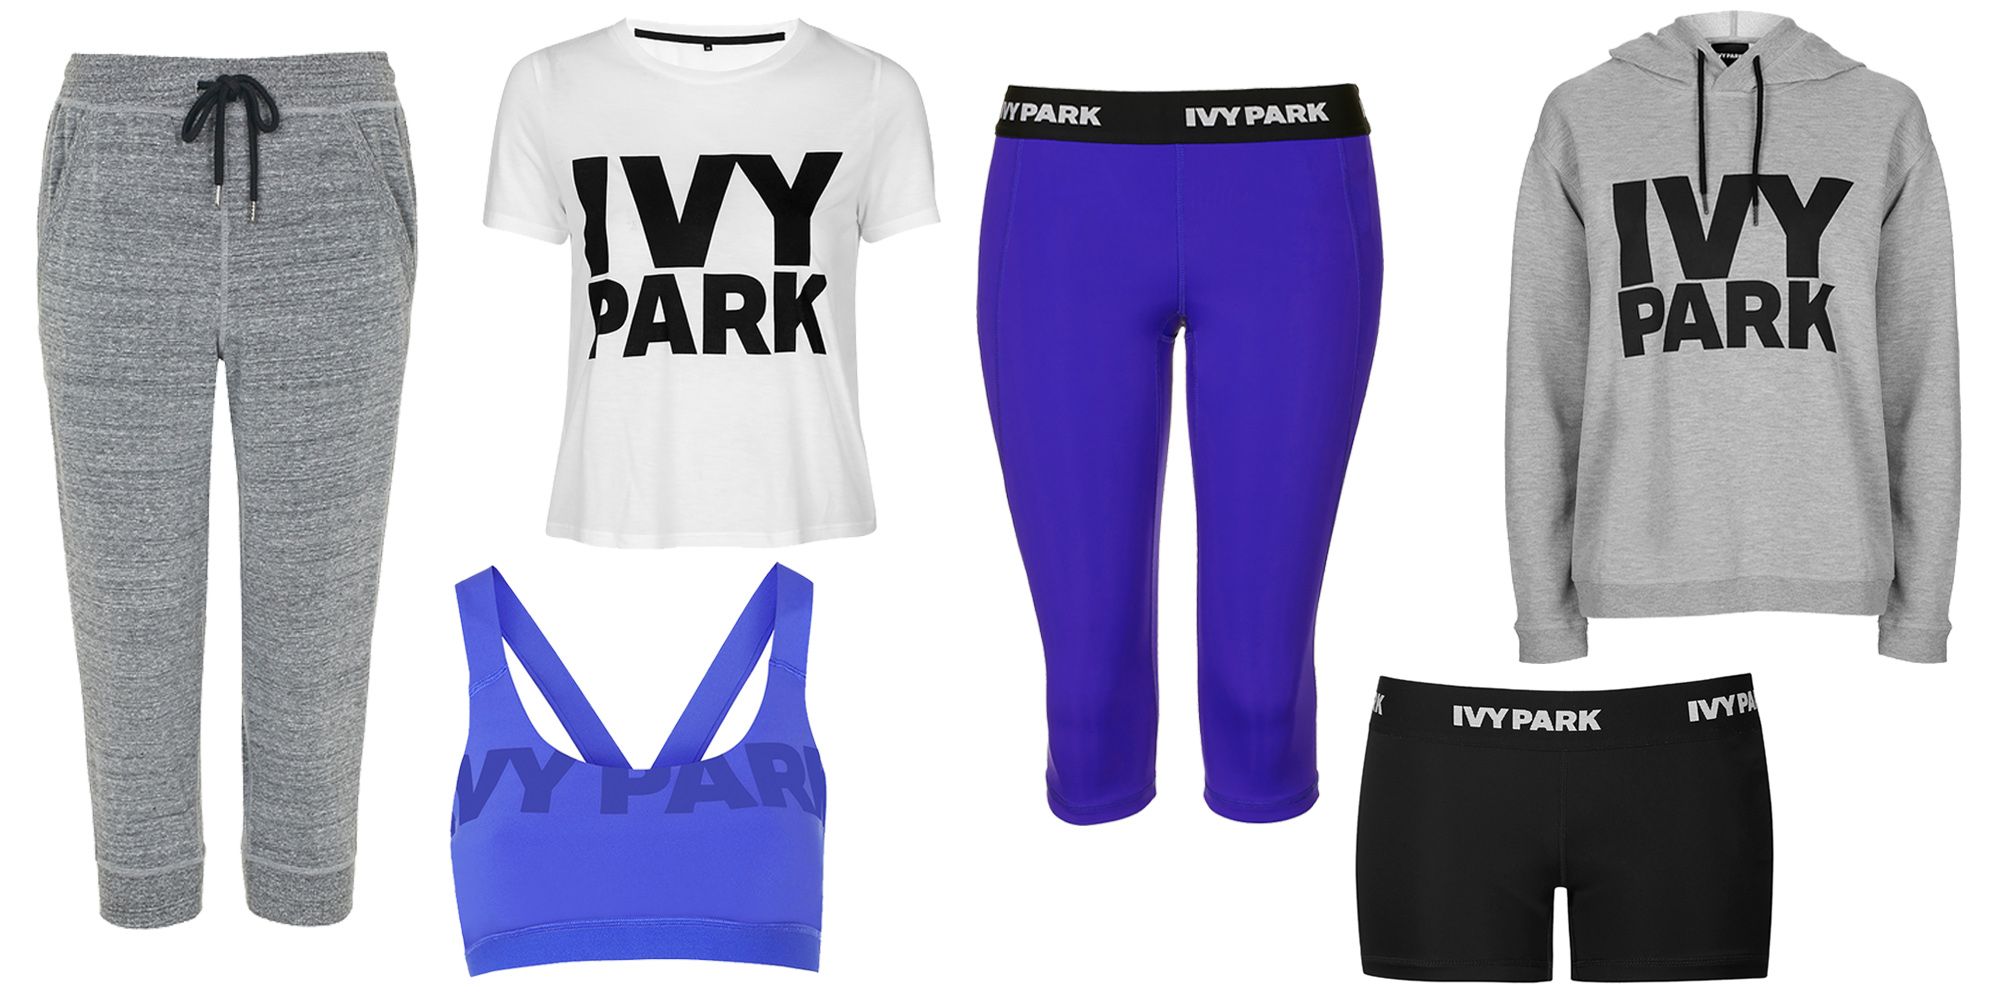 ivy park outfits